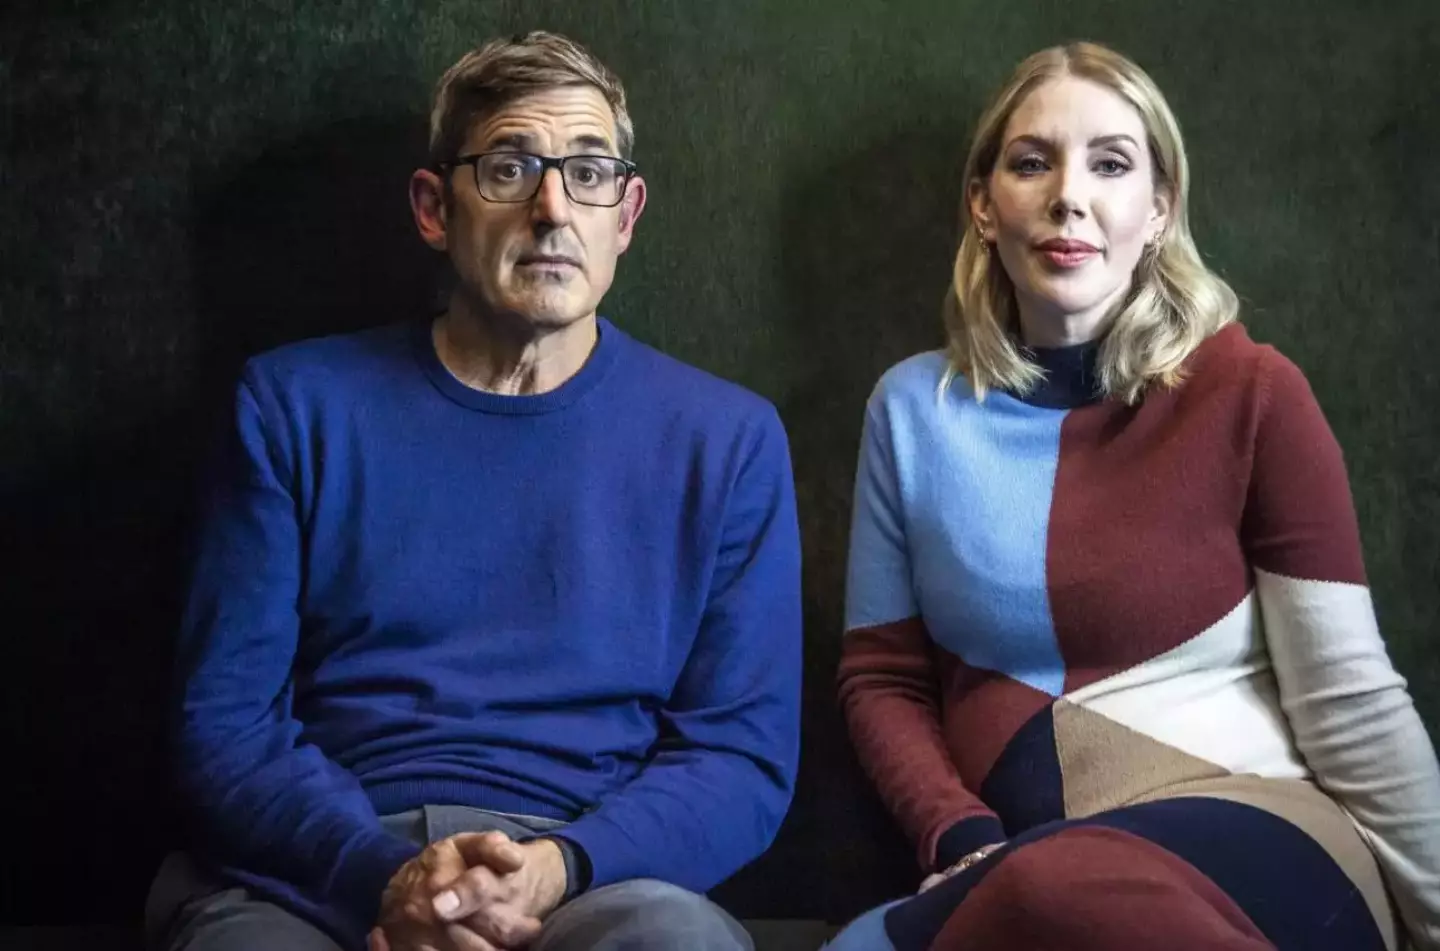 Katherine Ryan had previously spoke to Louis Theroux about a 'sexual predator' in the comedy industry.